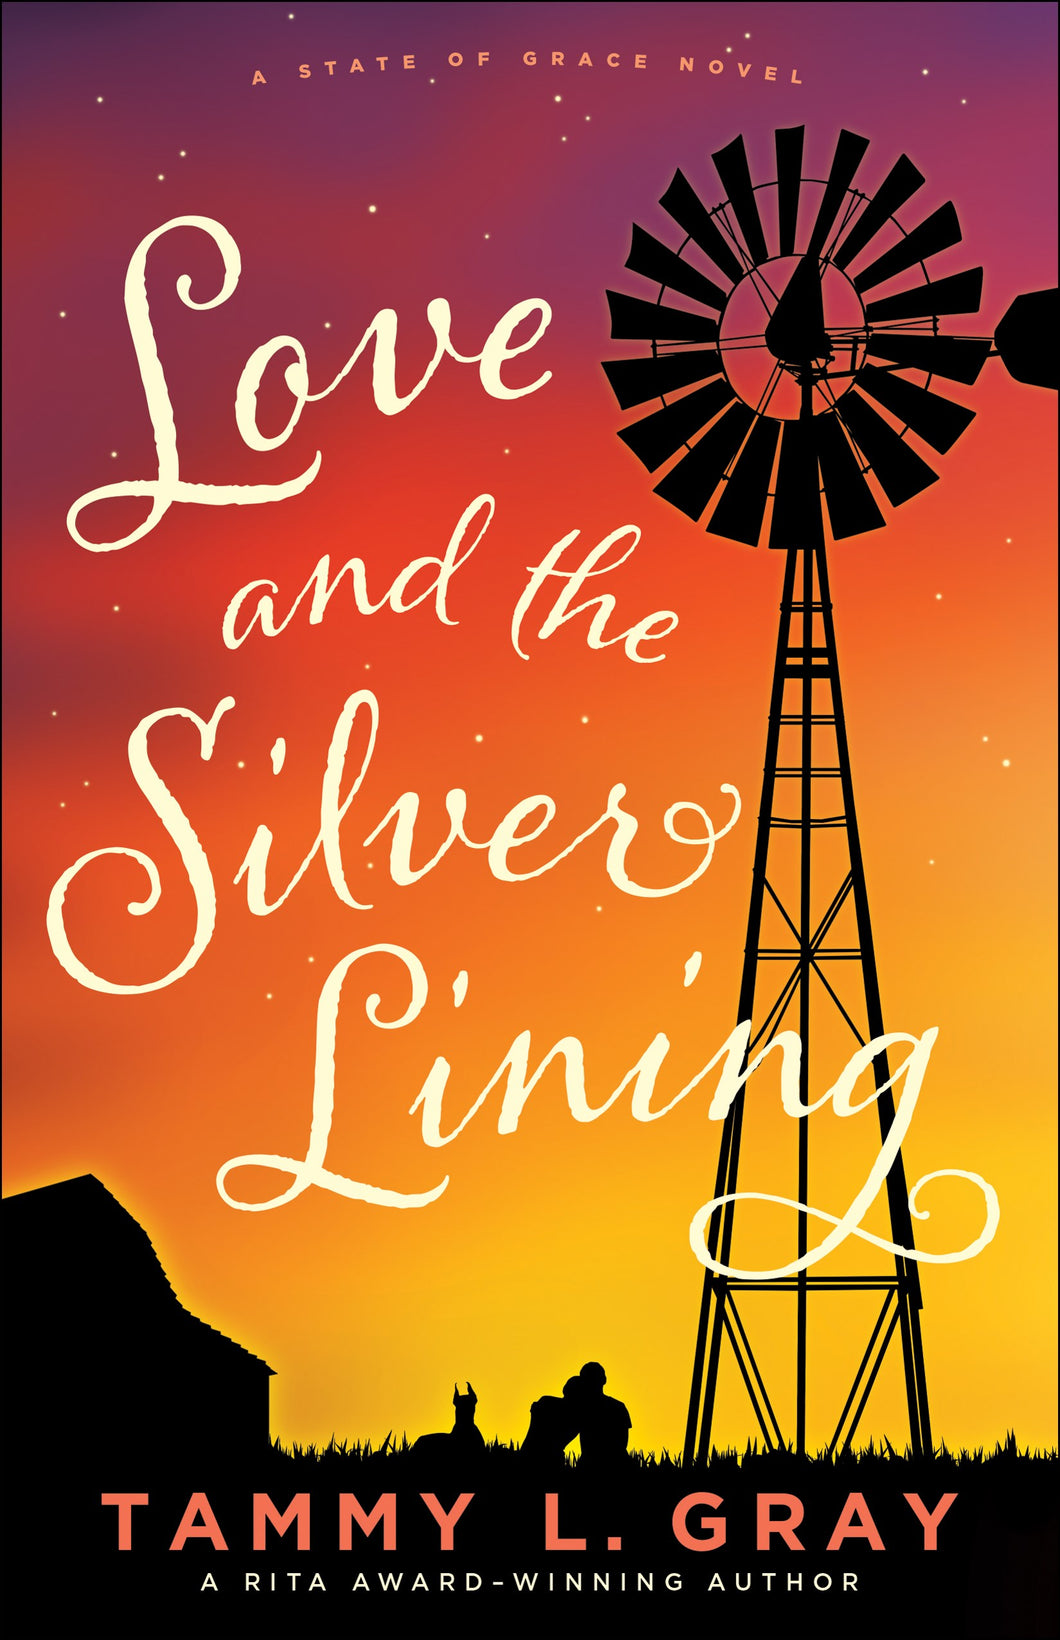 Love And The Silver Lining (A State Of Grace Novel)